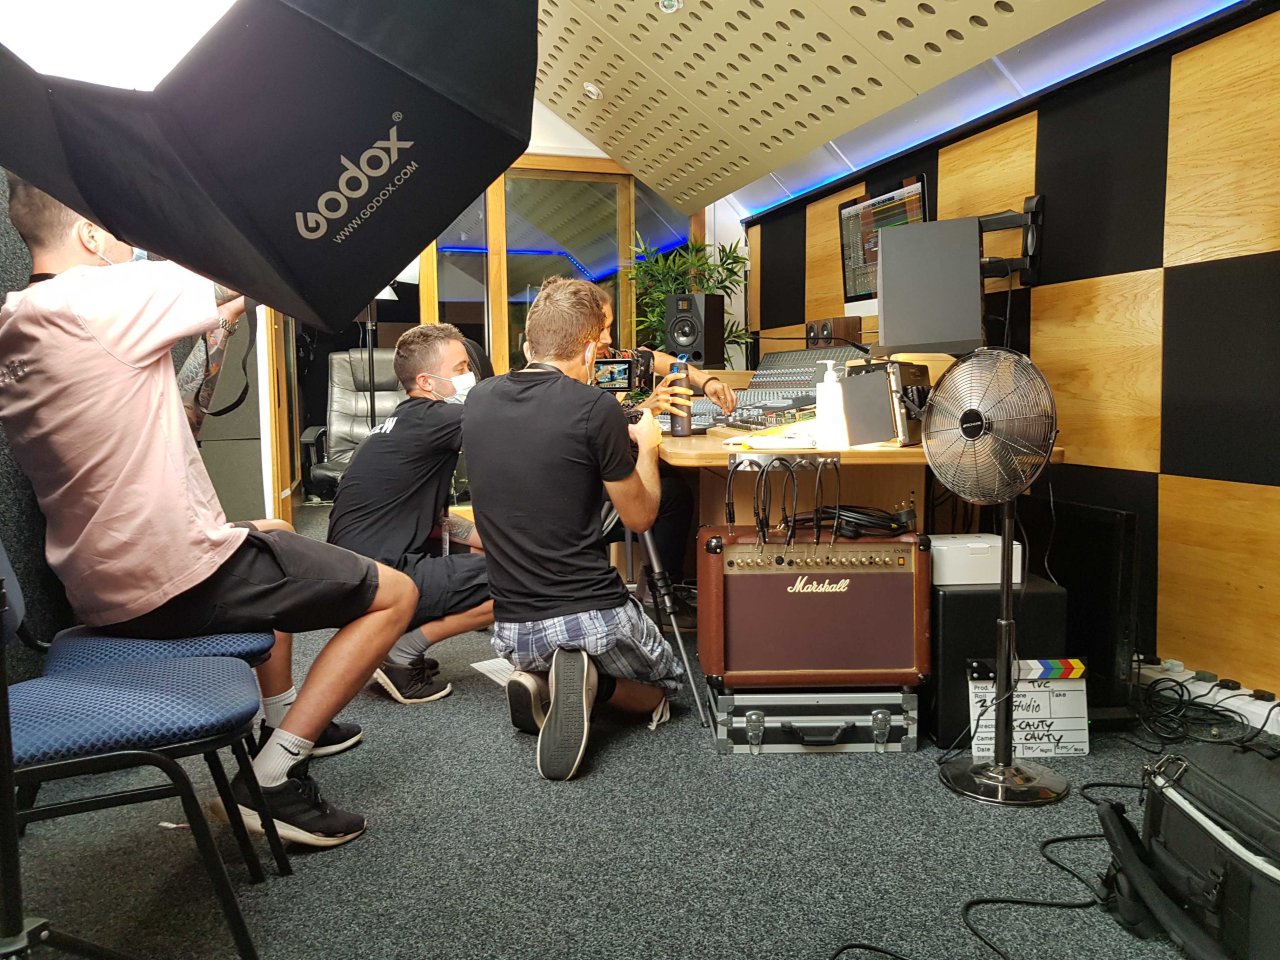 Setting up a scene in a recording studio for the advertisement.